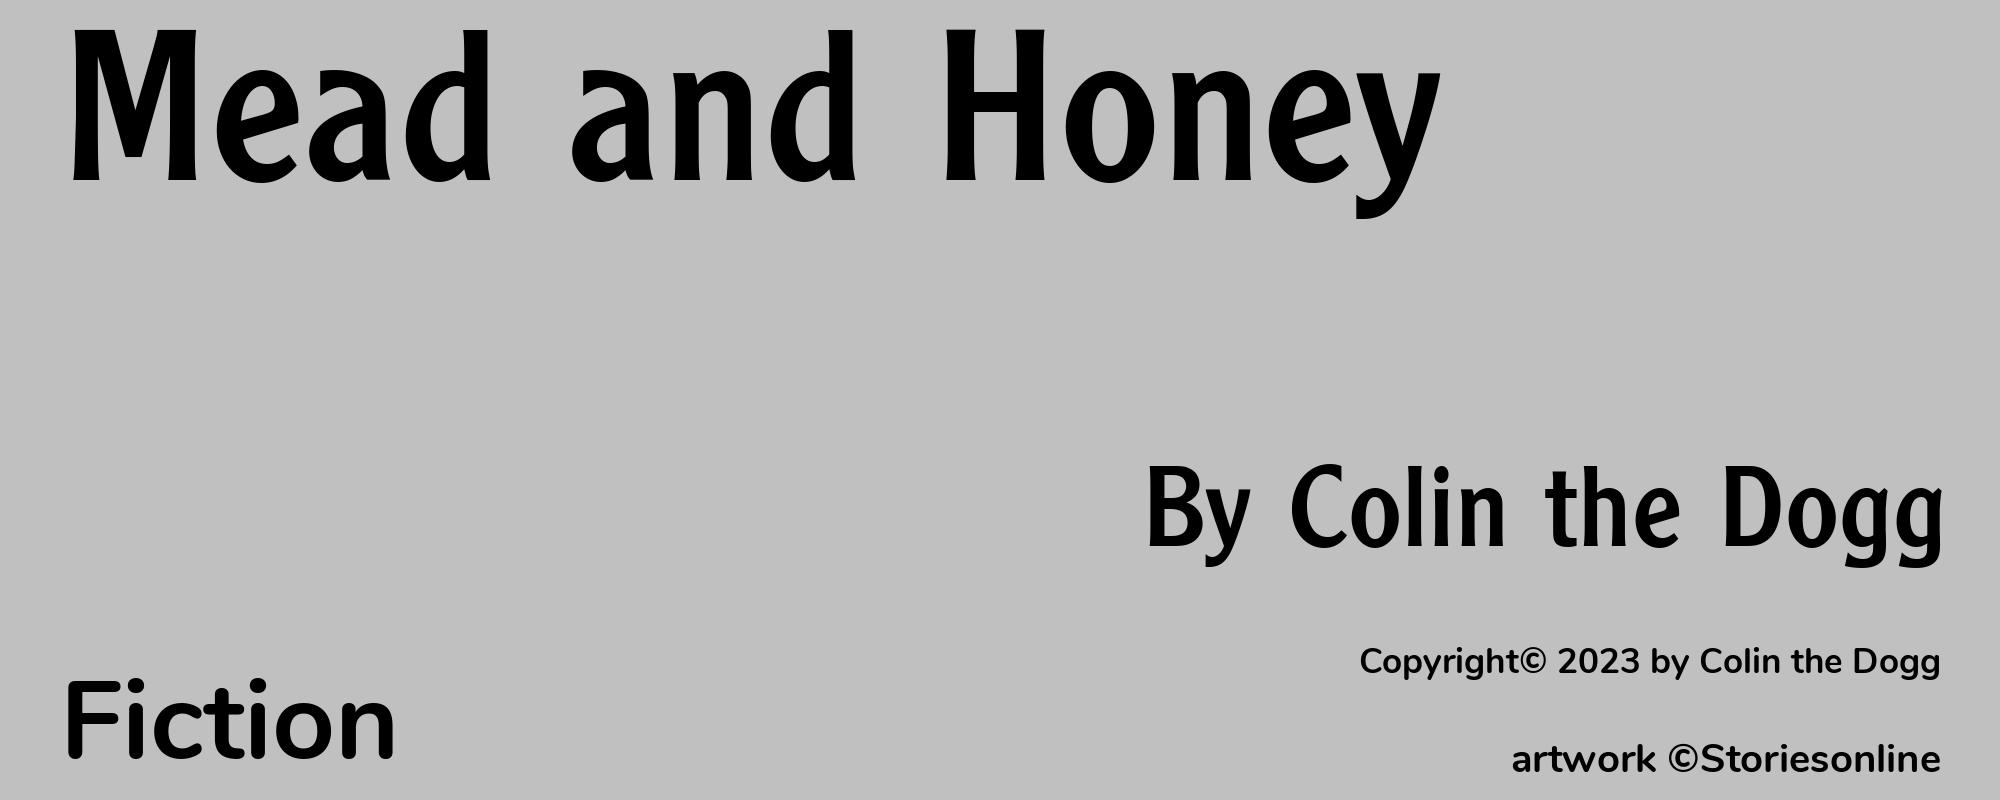 Mead and Honey - Cover